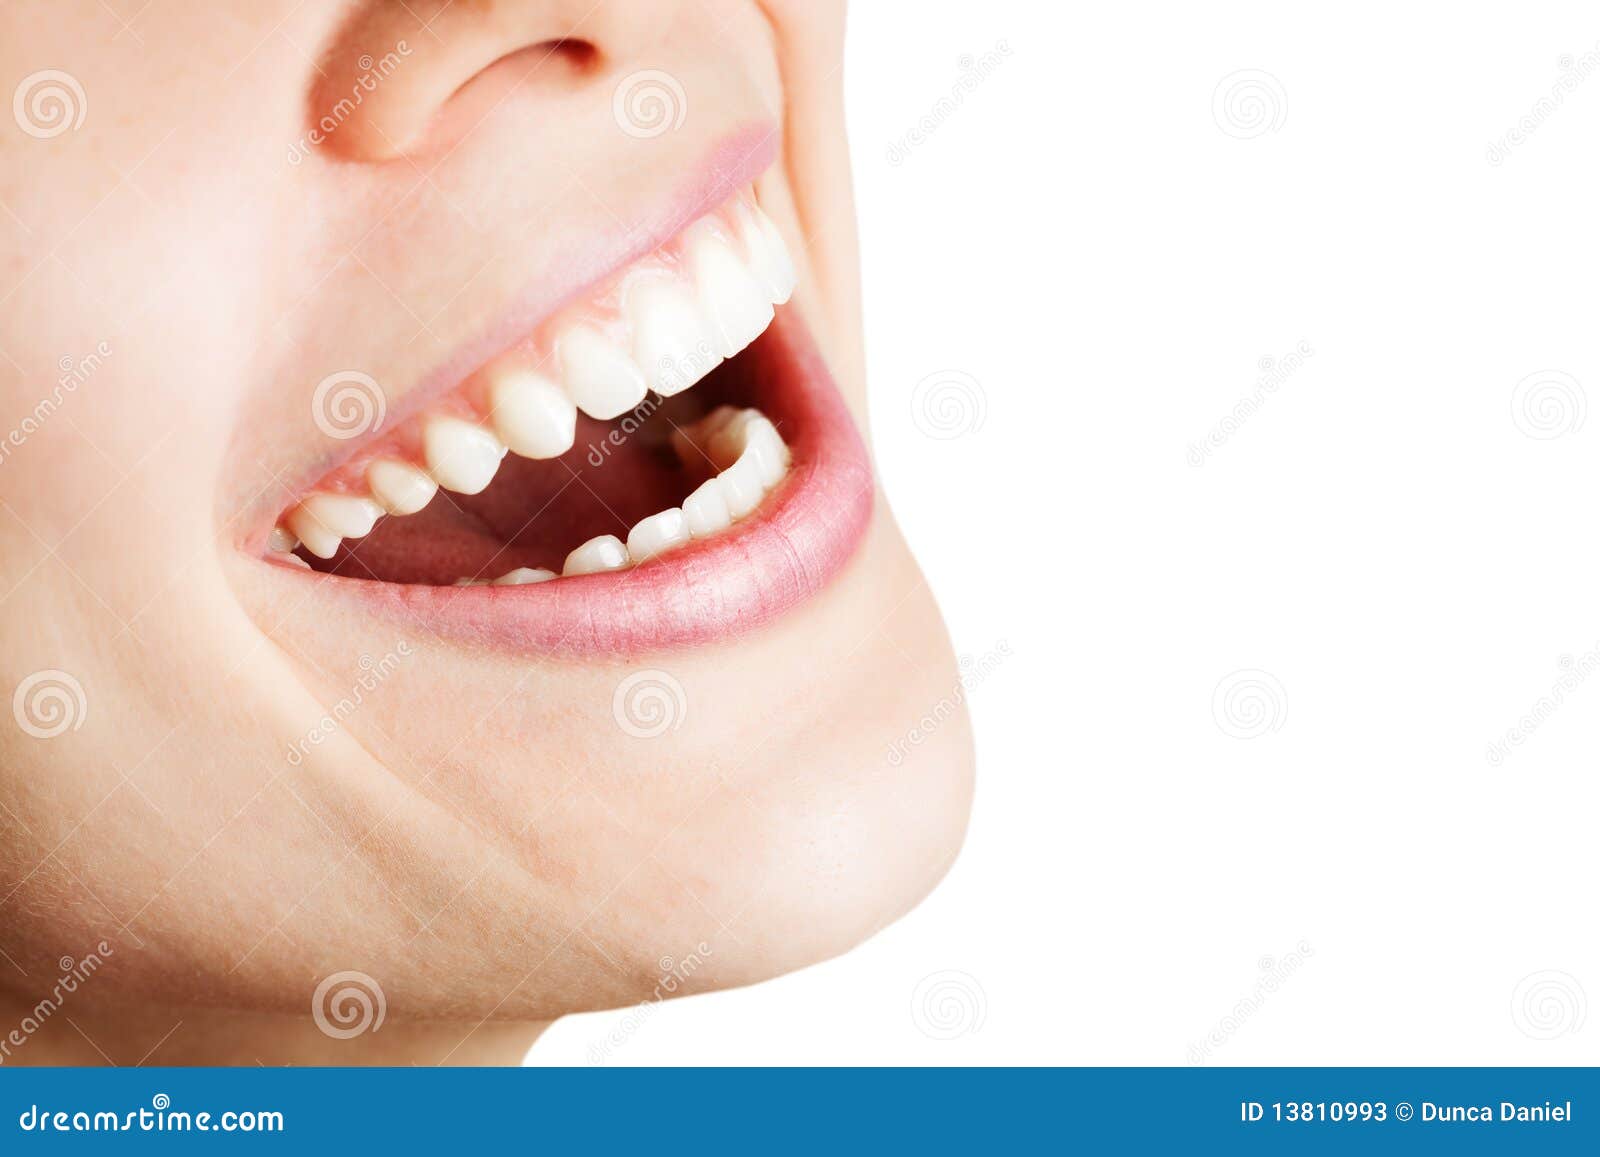 laugh of happy woman with healthy teeth